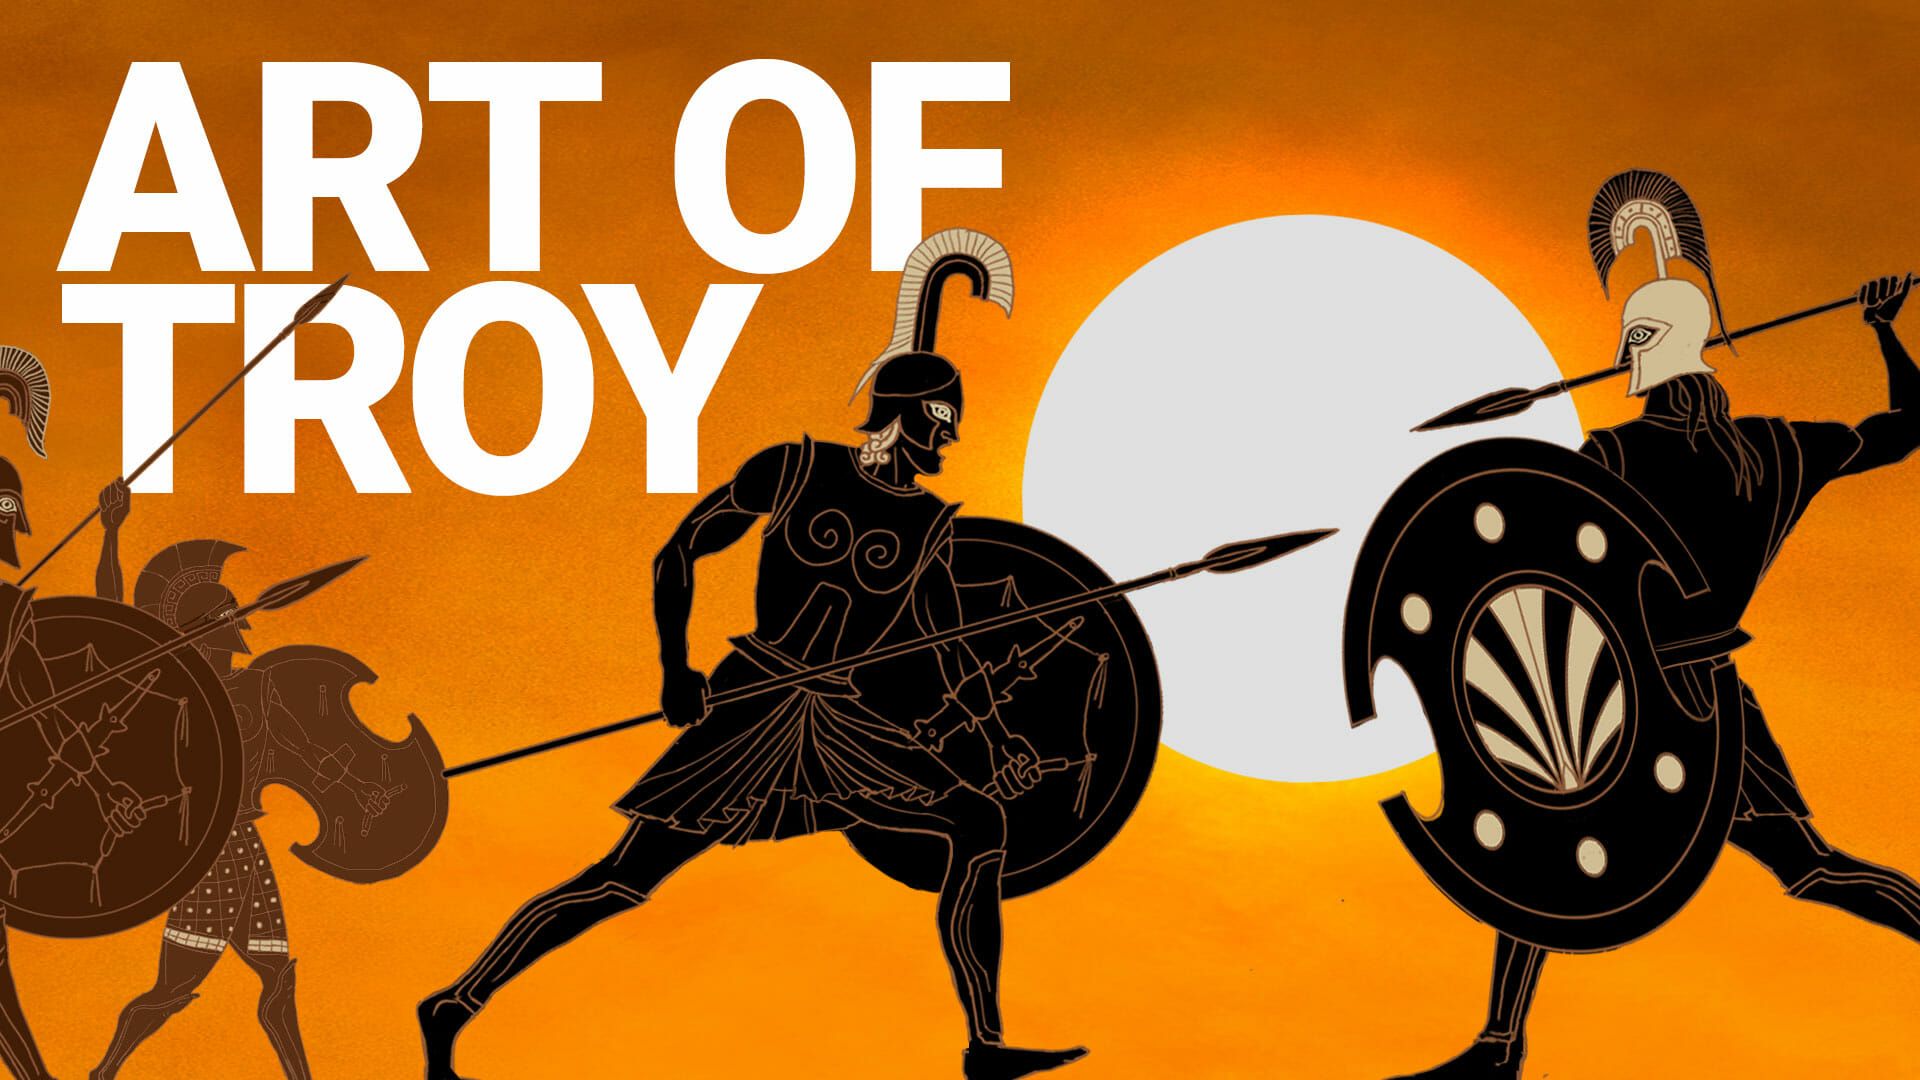 Achilles, Achaeans, and Aesthetics: The Art of TROY